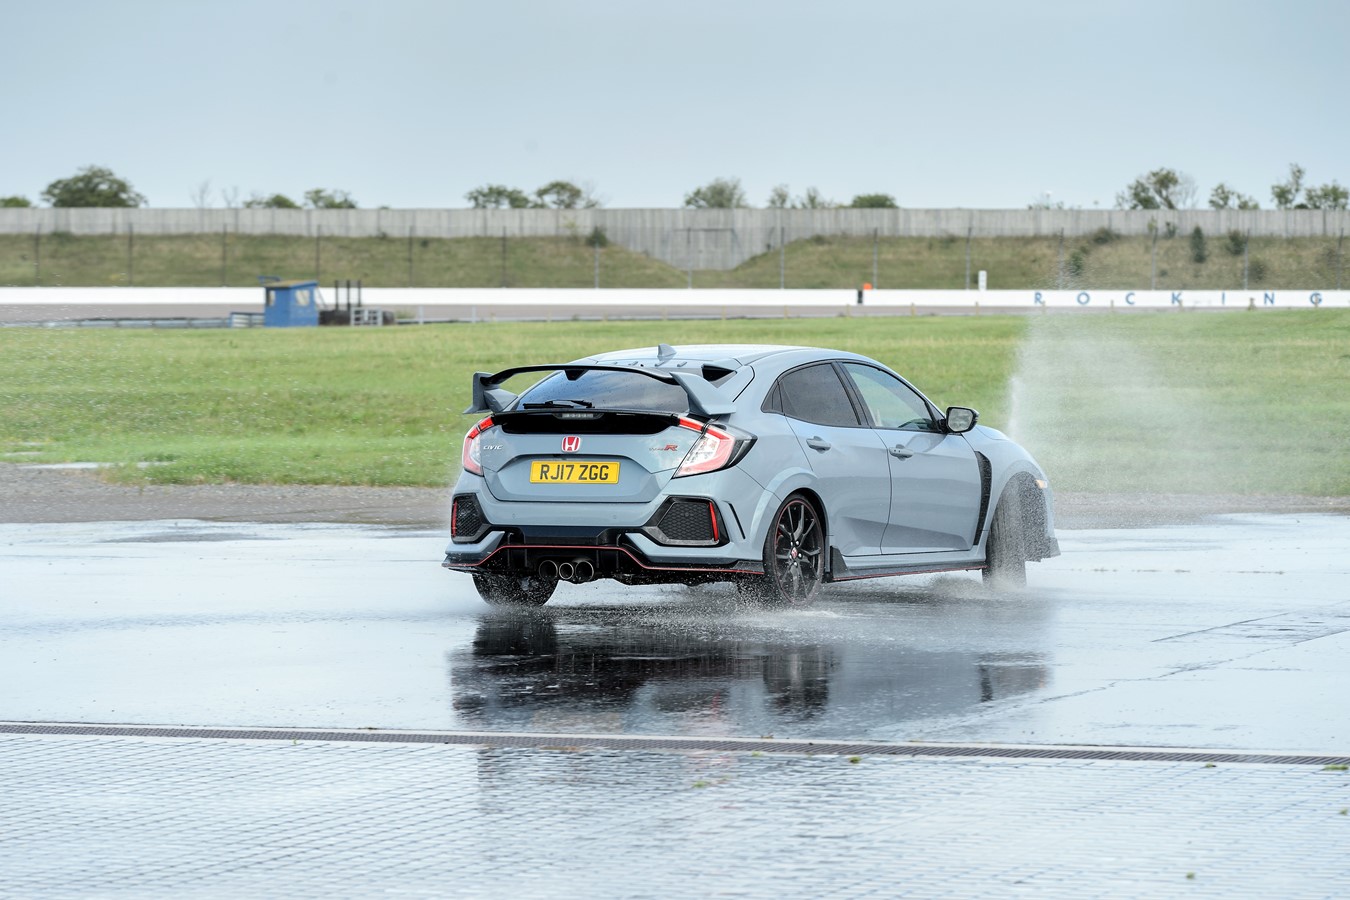 25th Anniversary Celebration of Type R and Fireblade